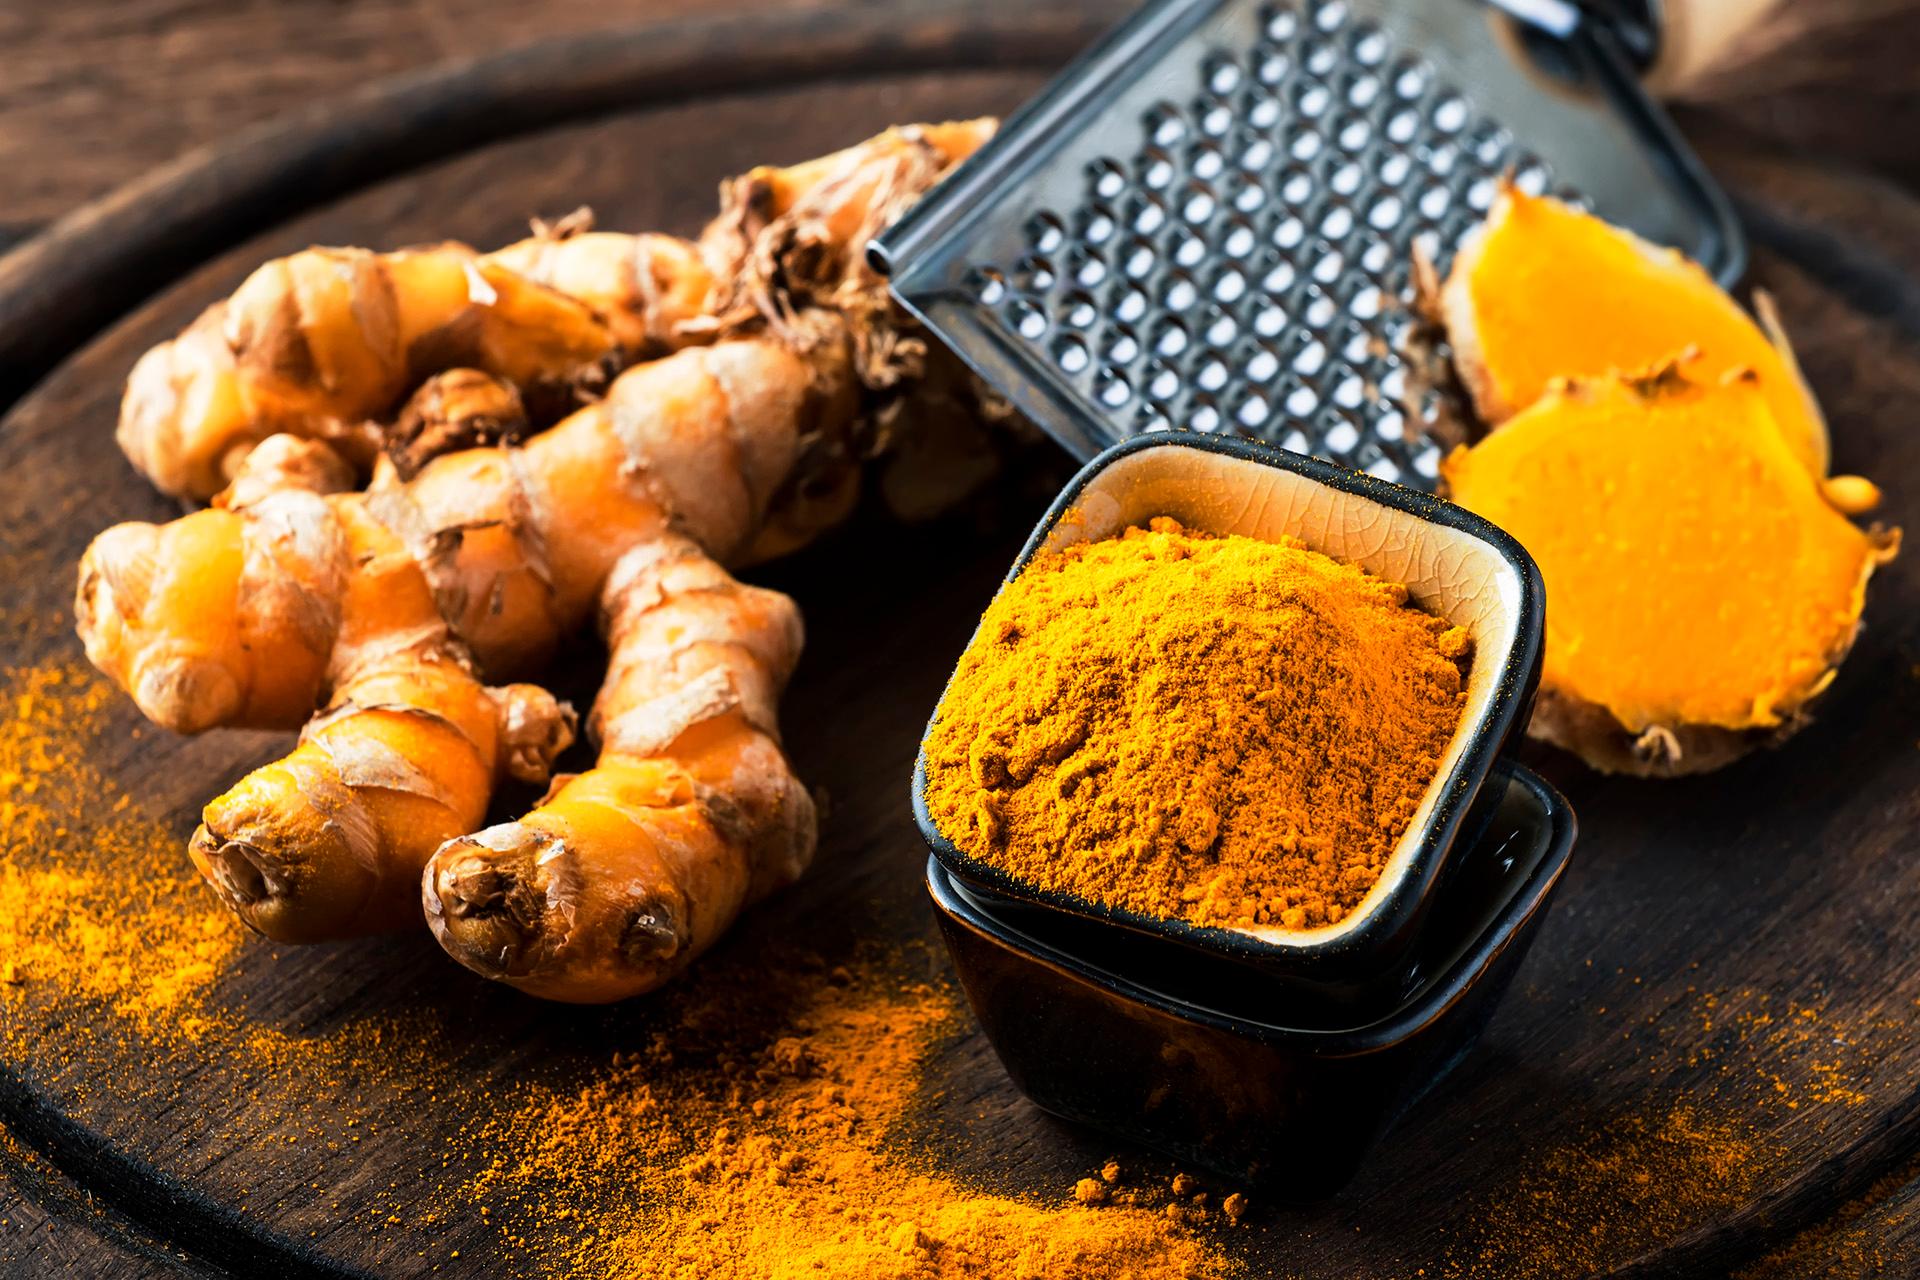 Turmeric: Nutritional Facts, Health Benefits, Potential Risks